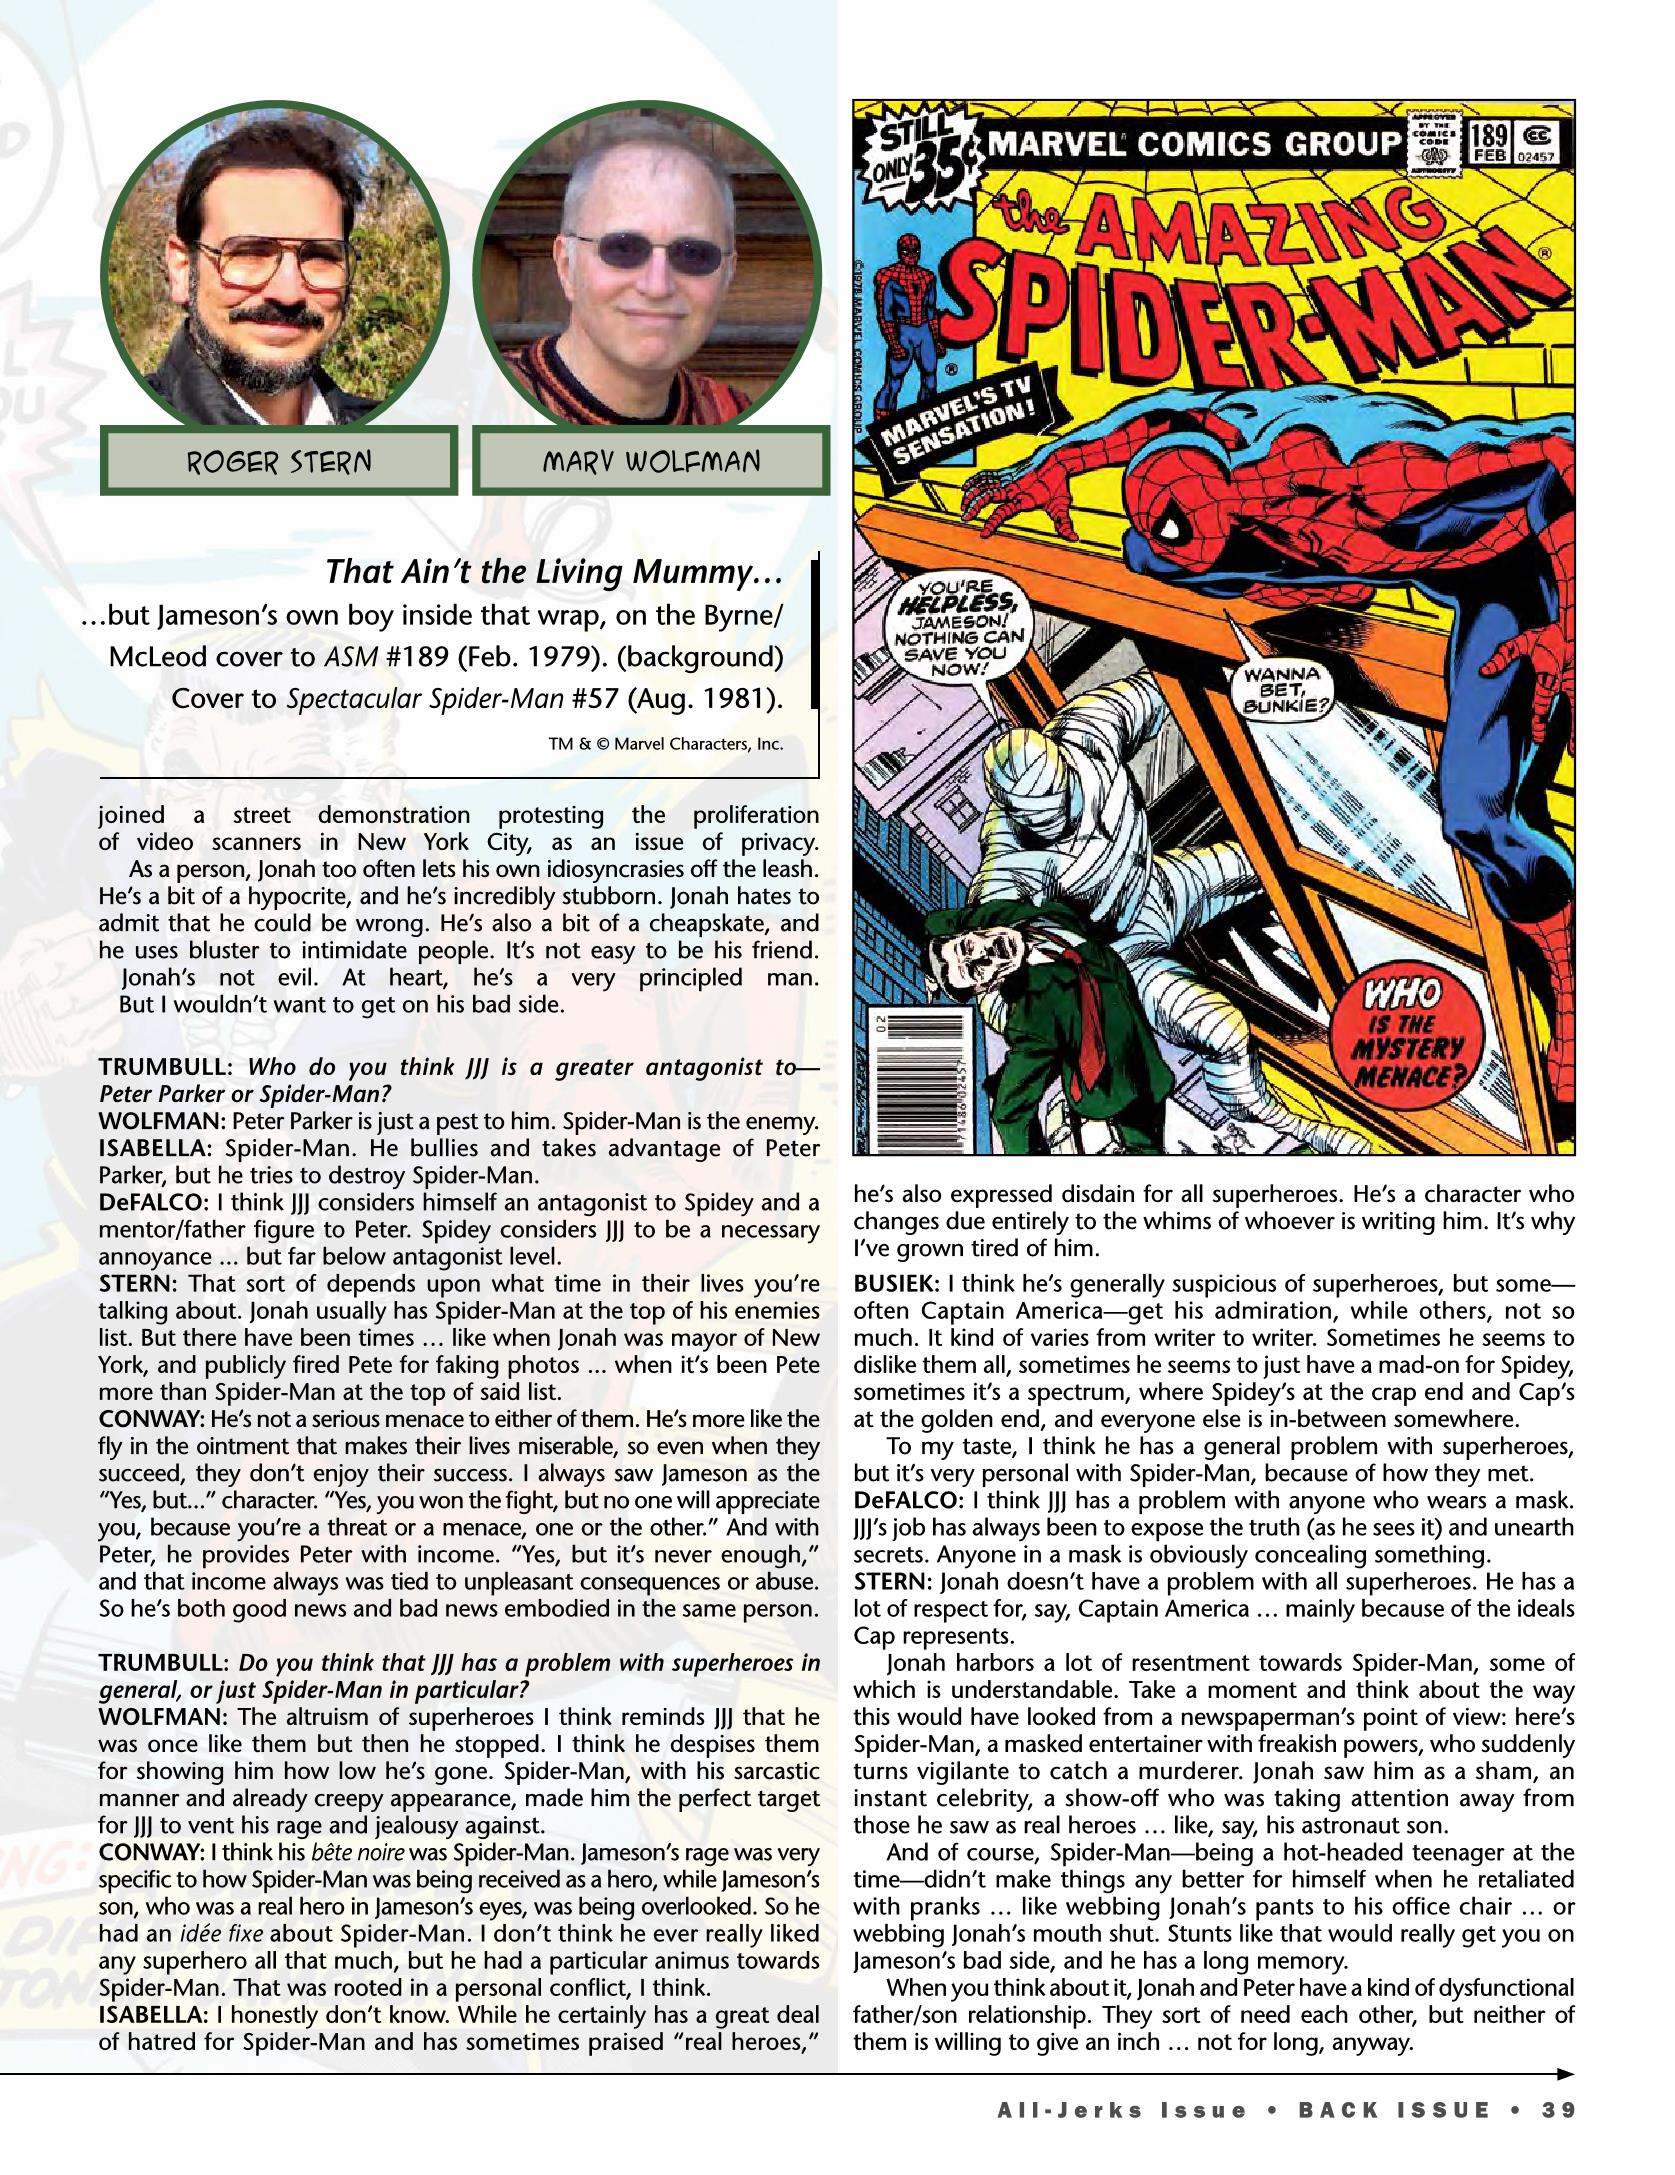 Read online Back Issue comic -  Issue #91 - 36